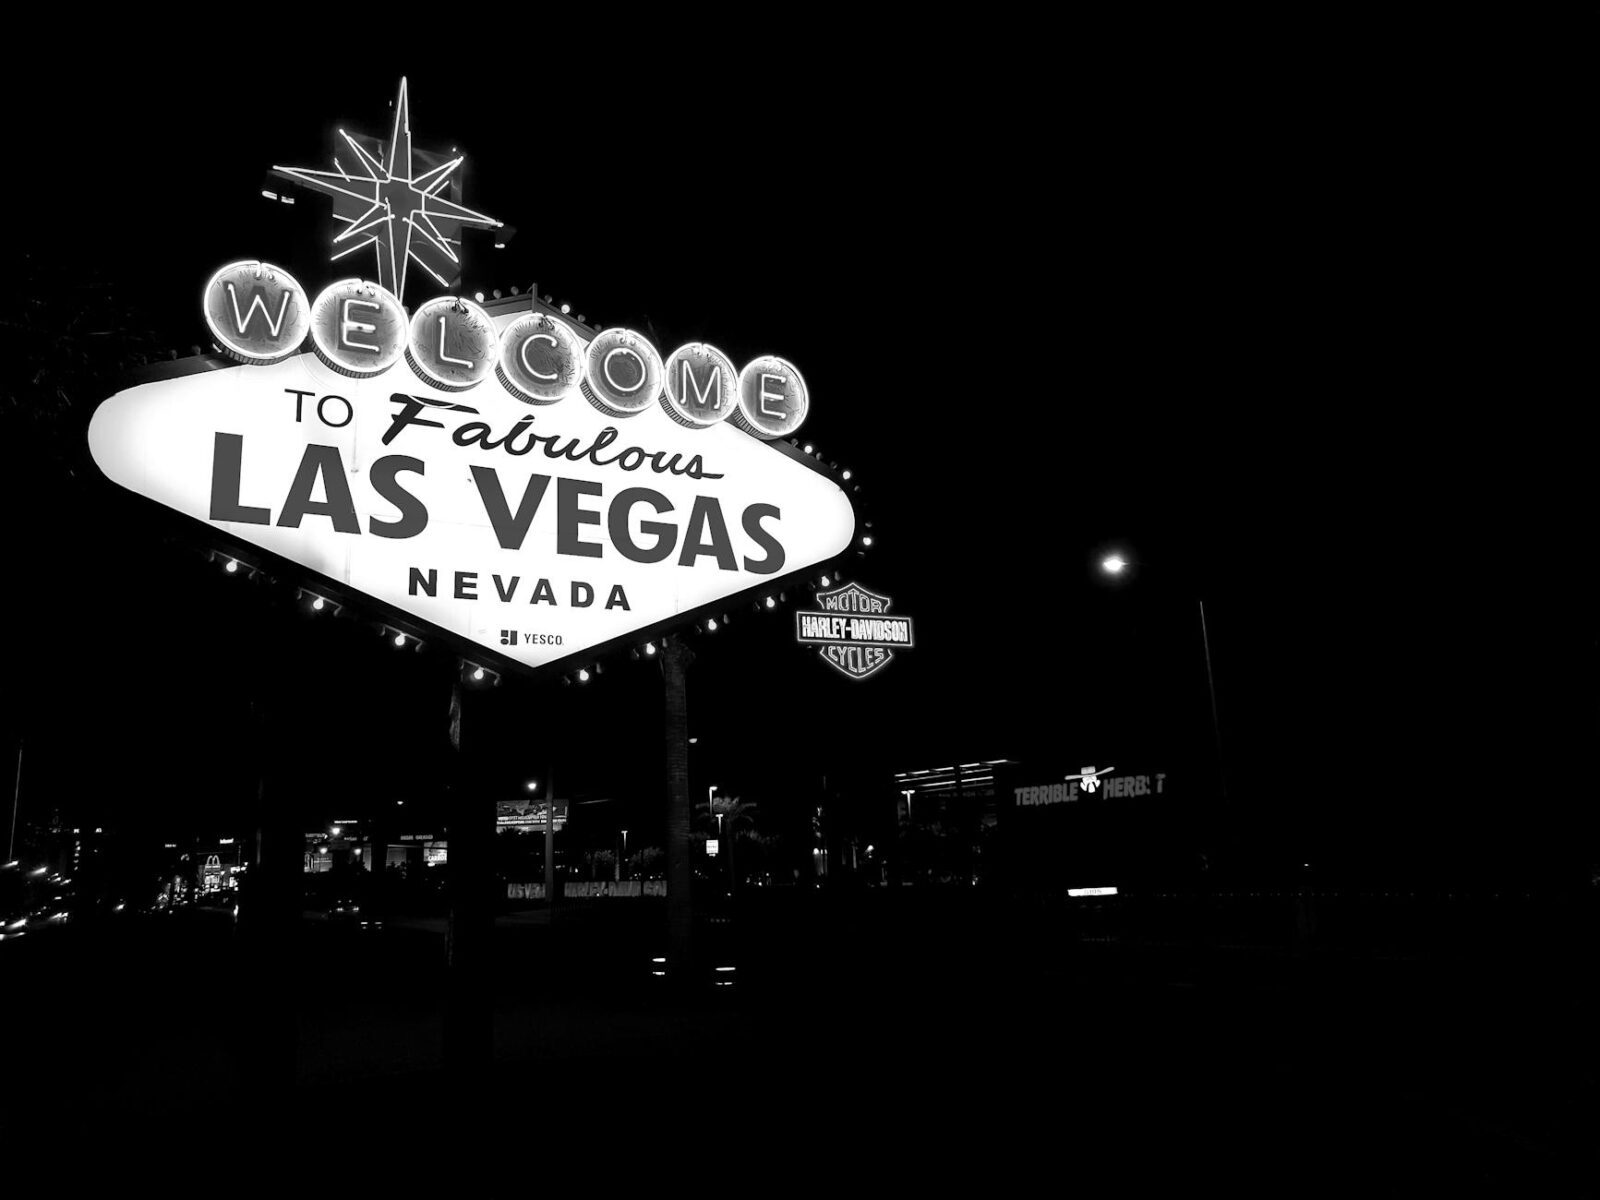 Sin City on a Budget: A Guide to Affordable Fun in Las Vegas